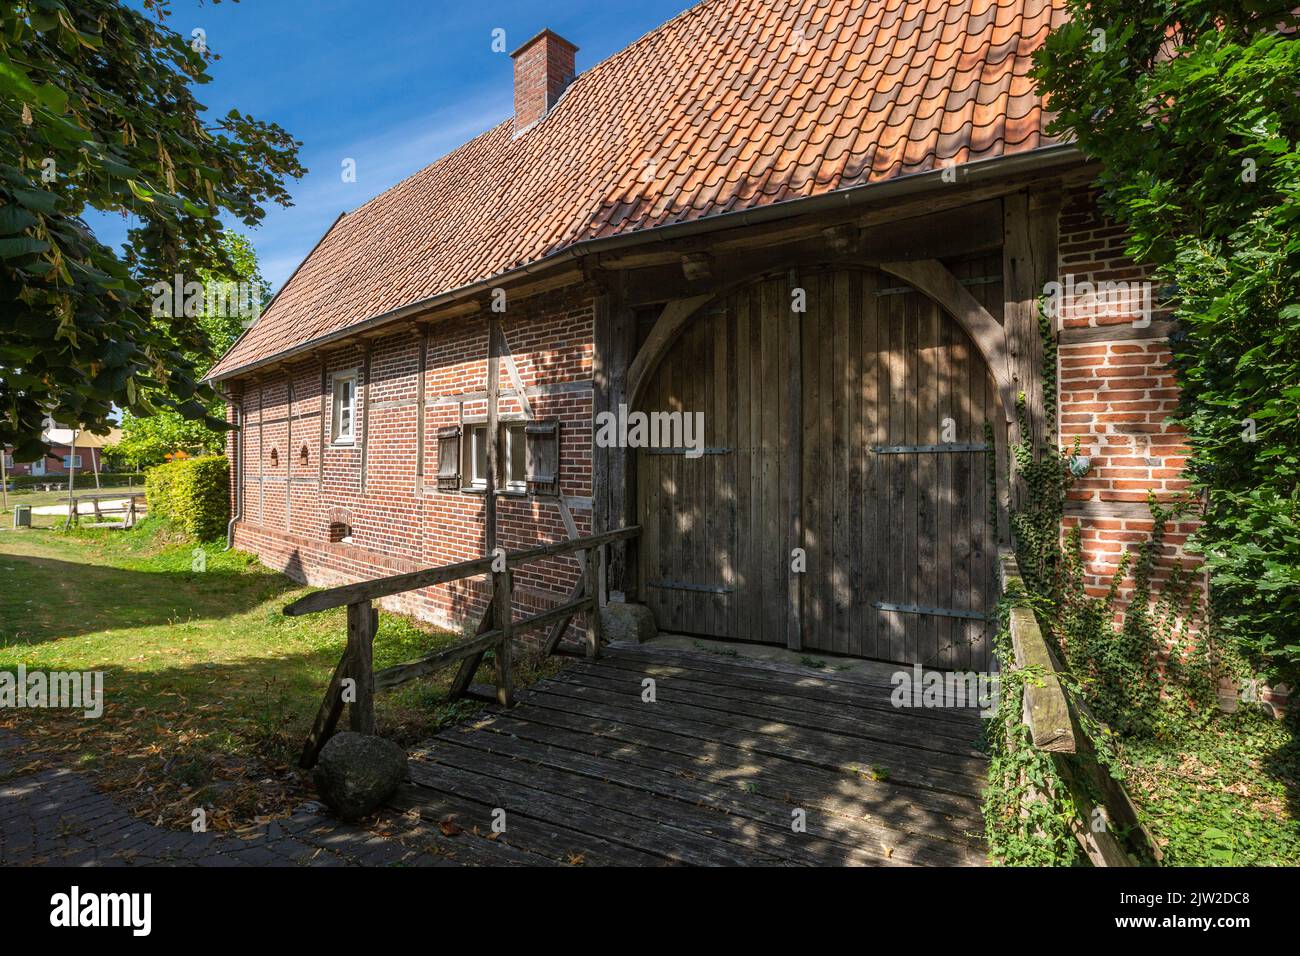 Germany, Rosendahl, Baumberge, Westmuensterland, Muensterland, Westphalia, North Rhine-Westphalia, NRW, Rosendahl-Holtwick, gatehouse of the Holtwick House, former Niederungsburg from the Middle Ages, half-timbered Stock Photo